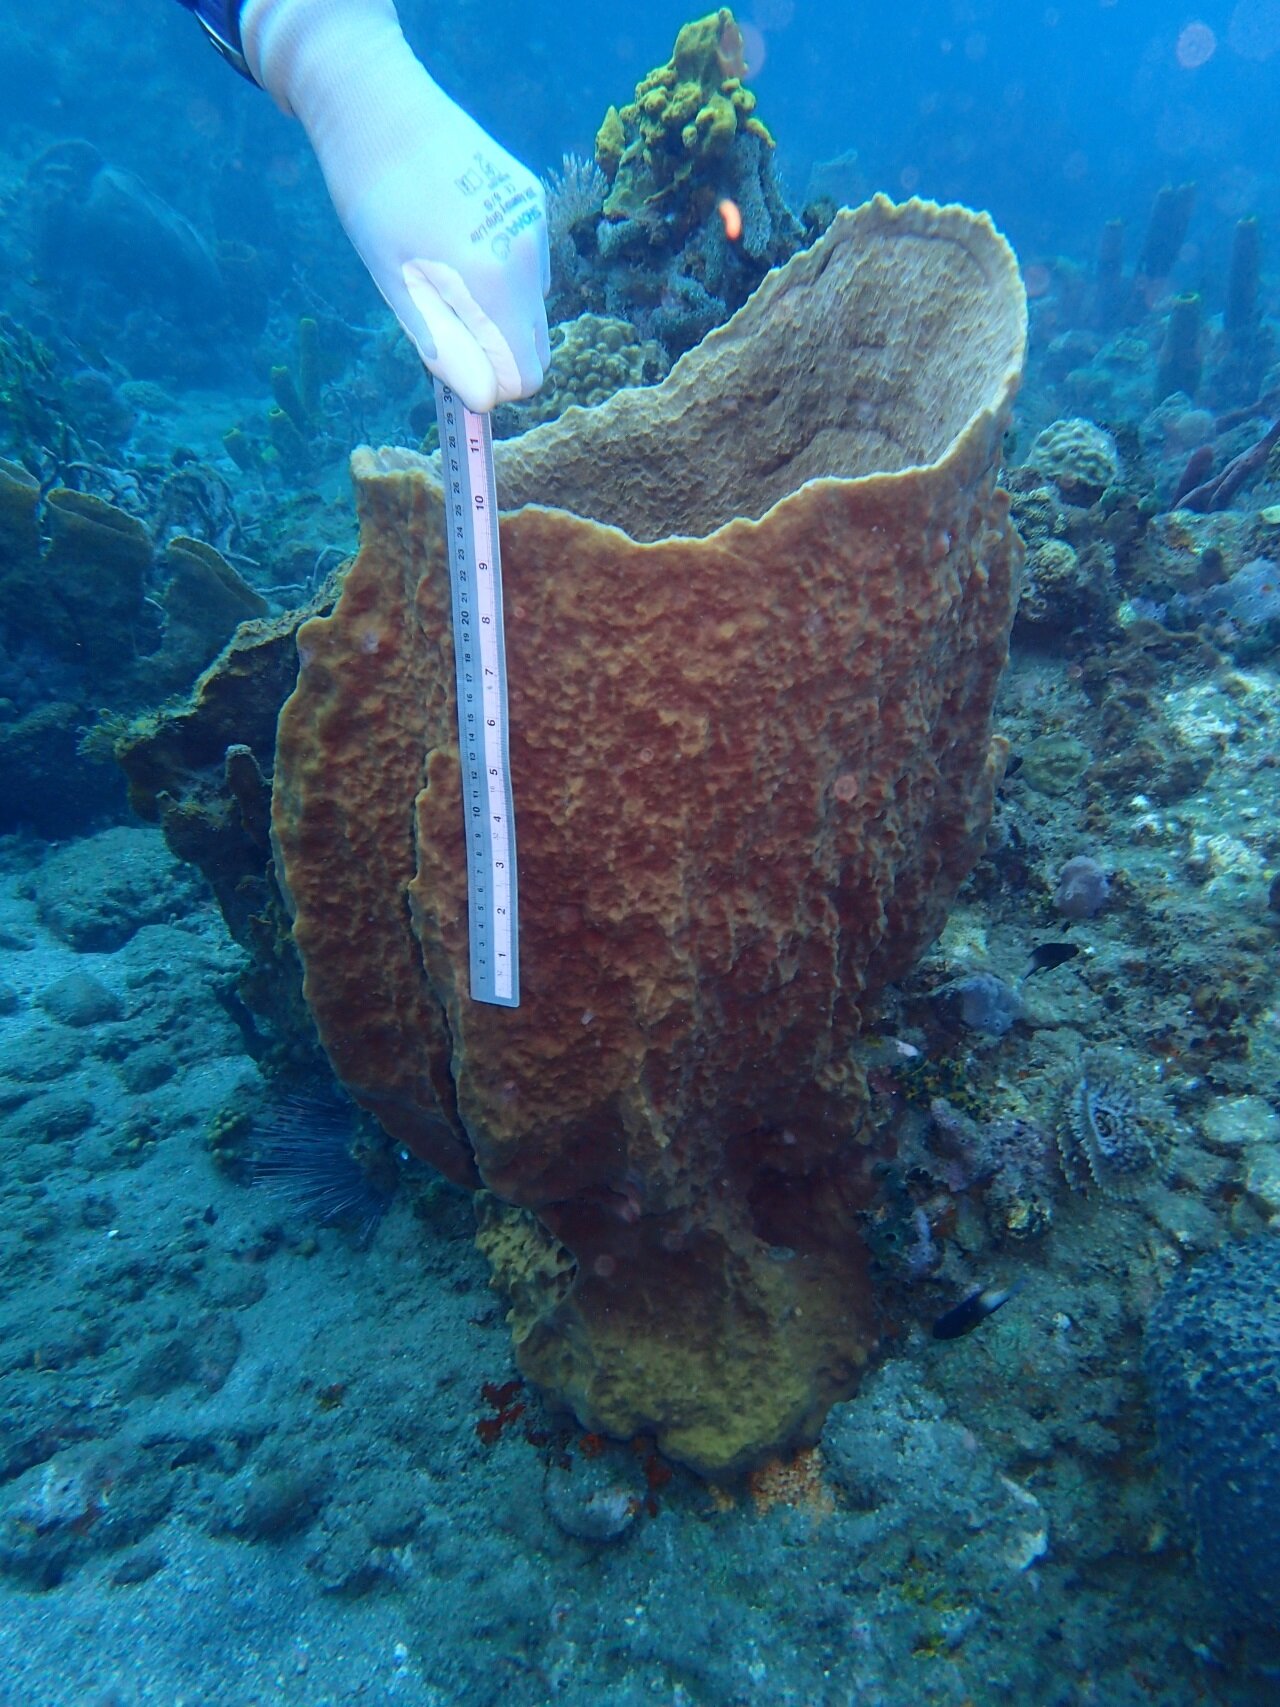 sponges that live in the sea